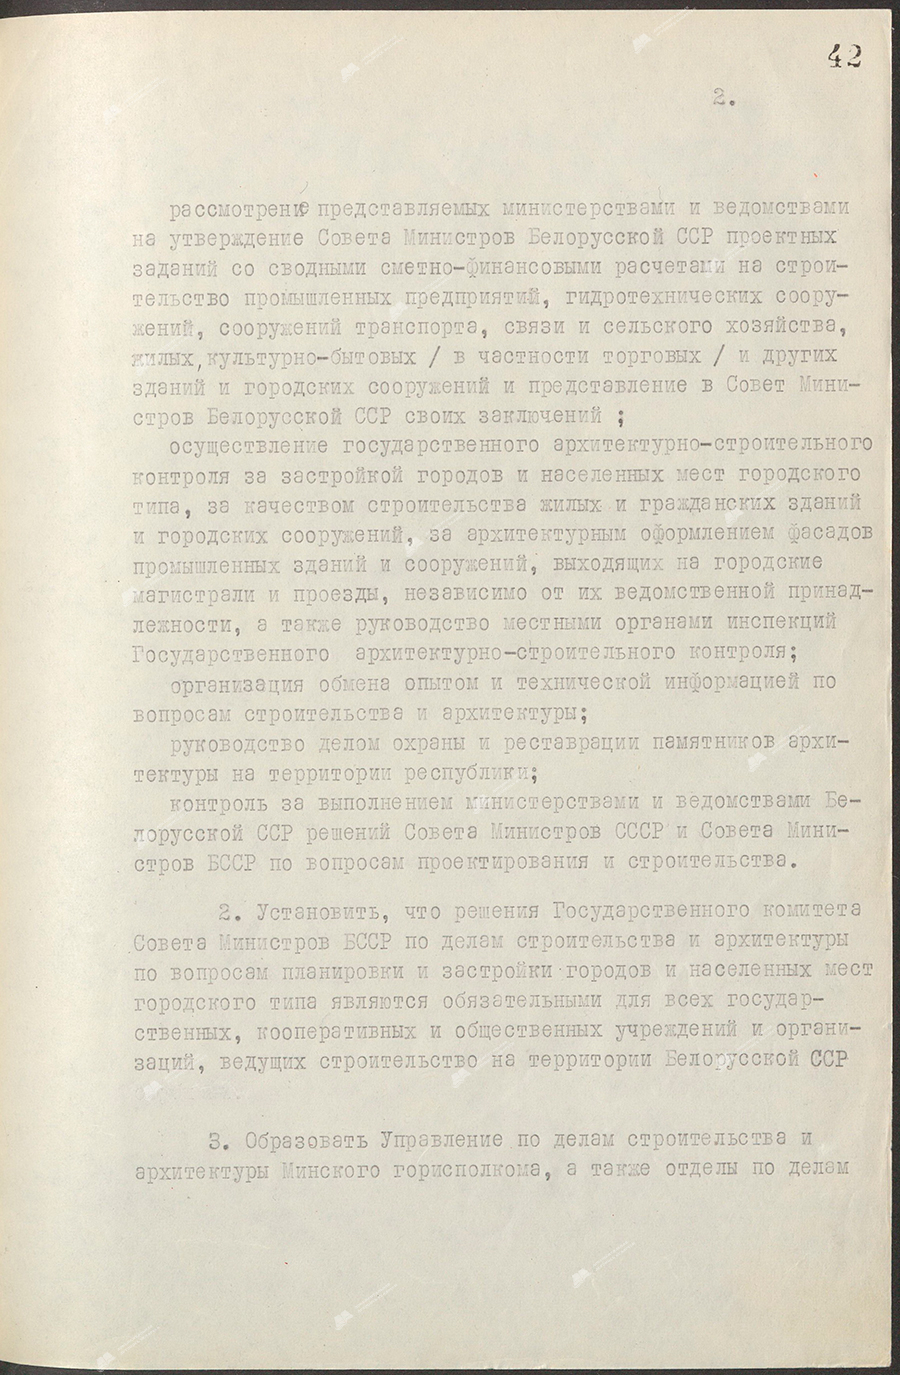 Resolution No. 544 of the Council of Ministers of the Byelorussian SSR «On the formation of the State Committee of the Council of Ministers of the BSSR for Construction and Architecture»-стр. 1